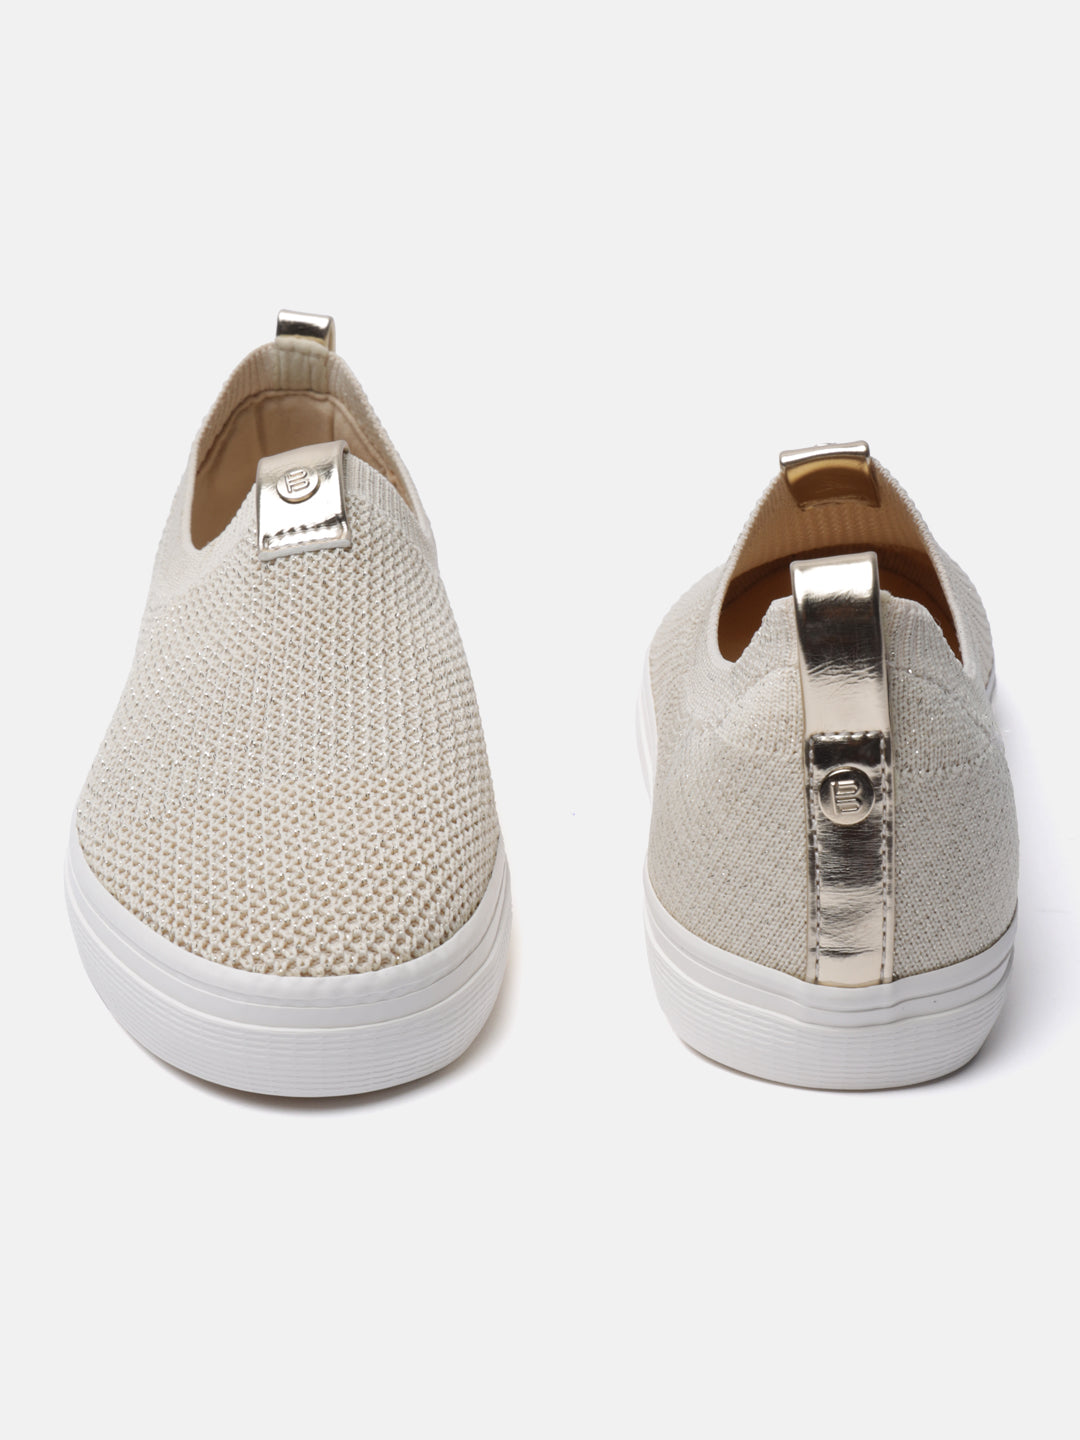 Lali Beige & Gold Casual Loafers